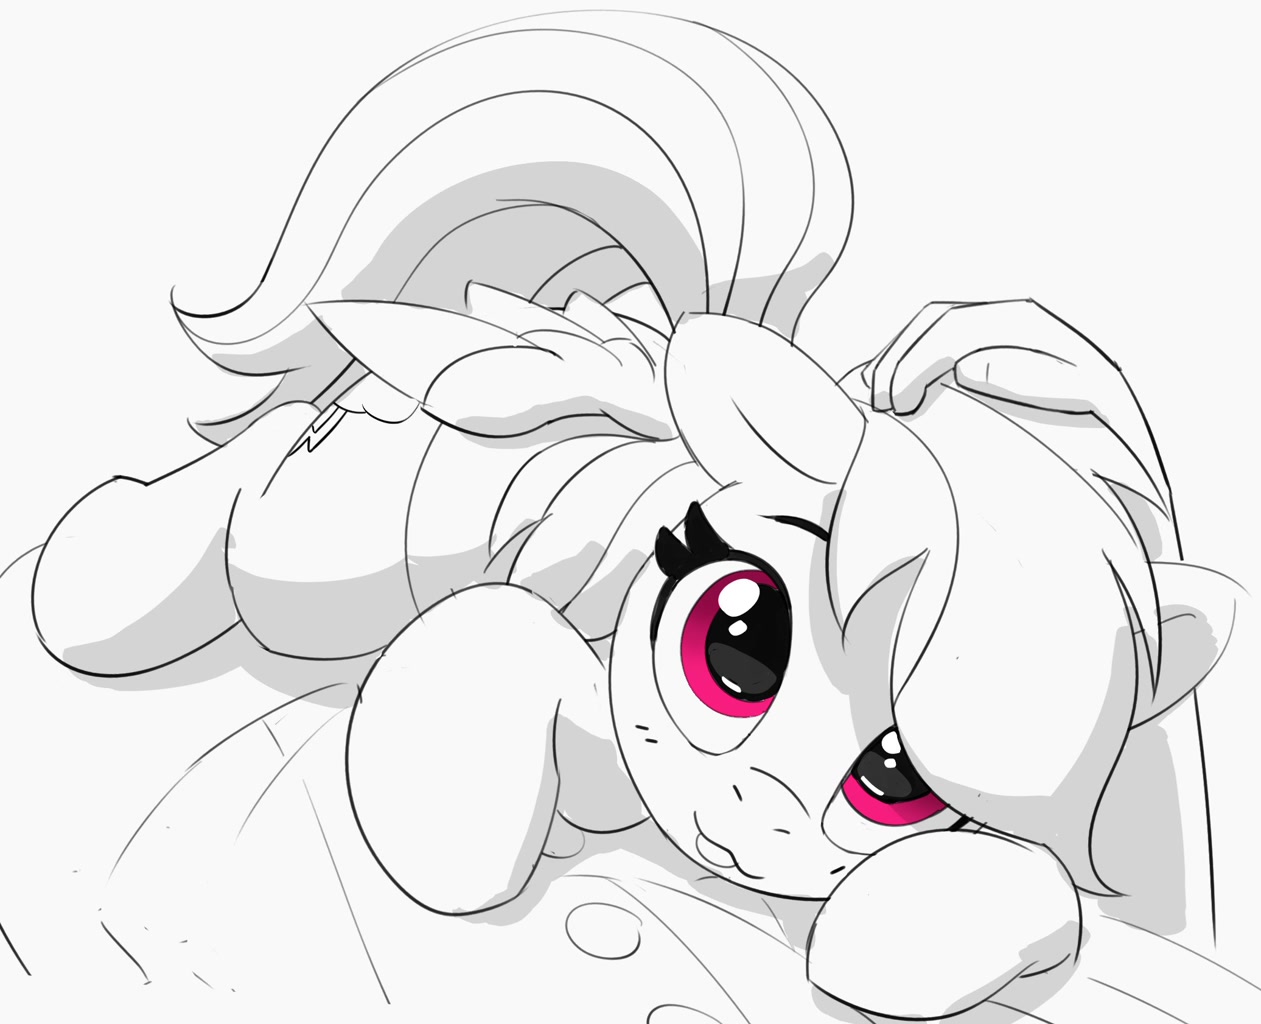 [:3,:p,cuddling,cute,female,floppy ears,grayscale,human,looking at you,mare,monochrome,pegasus,petting,pony,pov,rainbow dash,safe,simple background,snuggling,white background,tongue out,human on pony snuggling,dashabetes,partial color,hand on head,smiling,offscreen character,smiling at you,artist:pabbley]